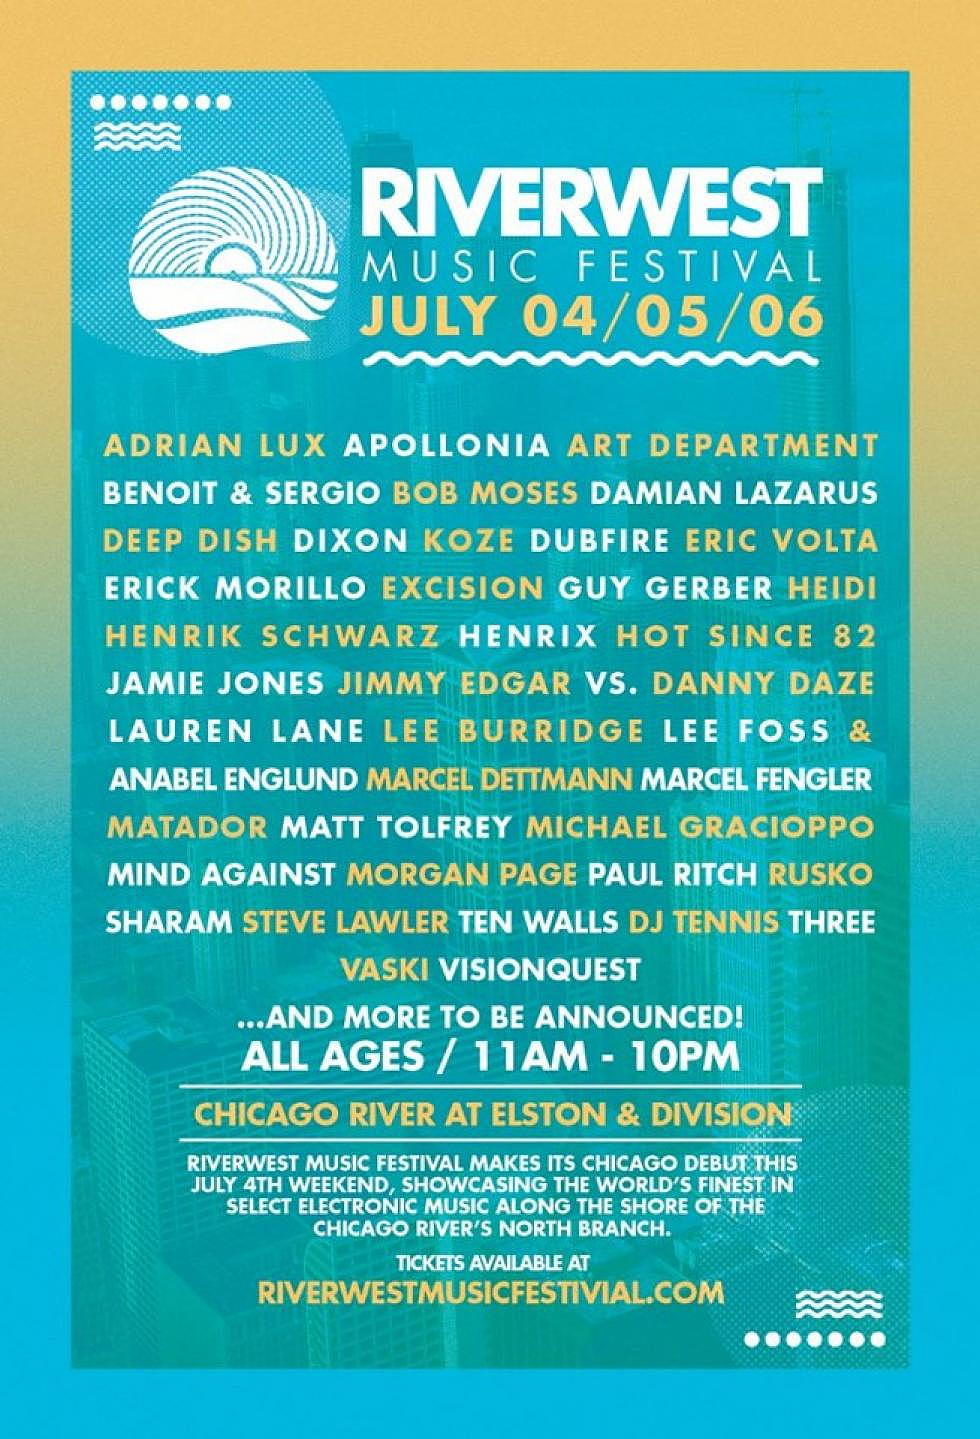 Riverwest Music Festival to Debut in Chicago, July 4th-6th